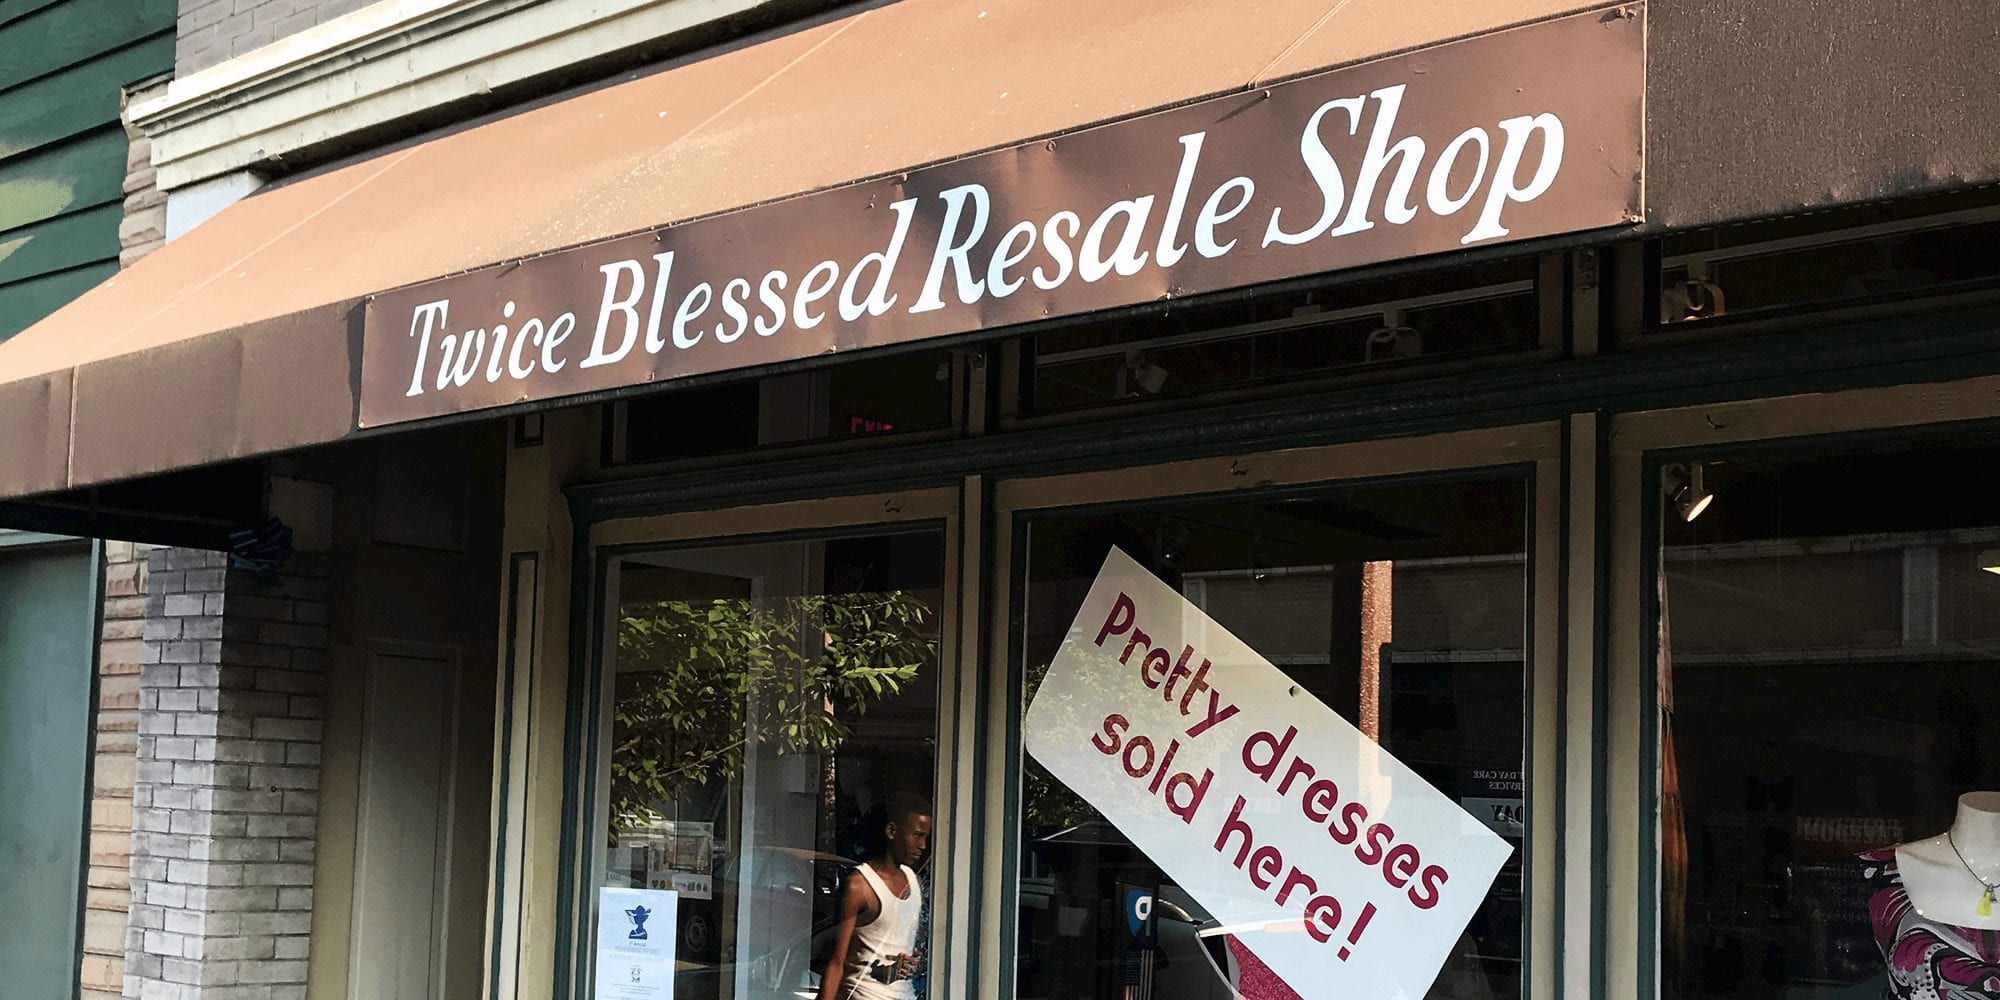 Twice Blessed Resale Shop on Meramec Street in Downtown Dutchtown.